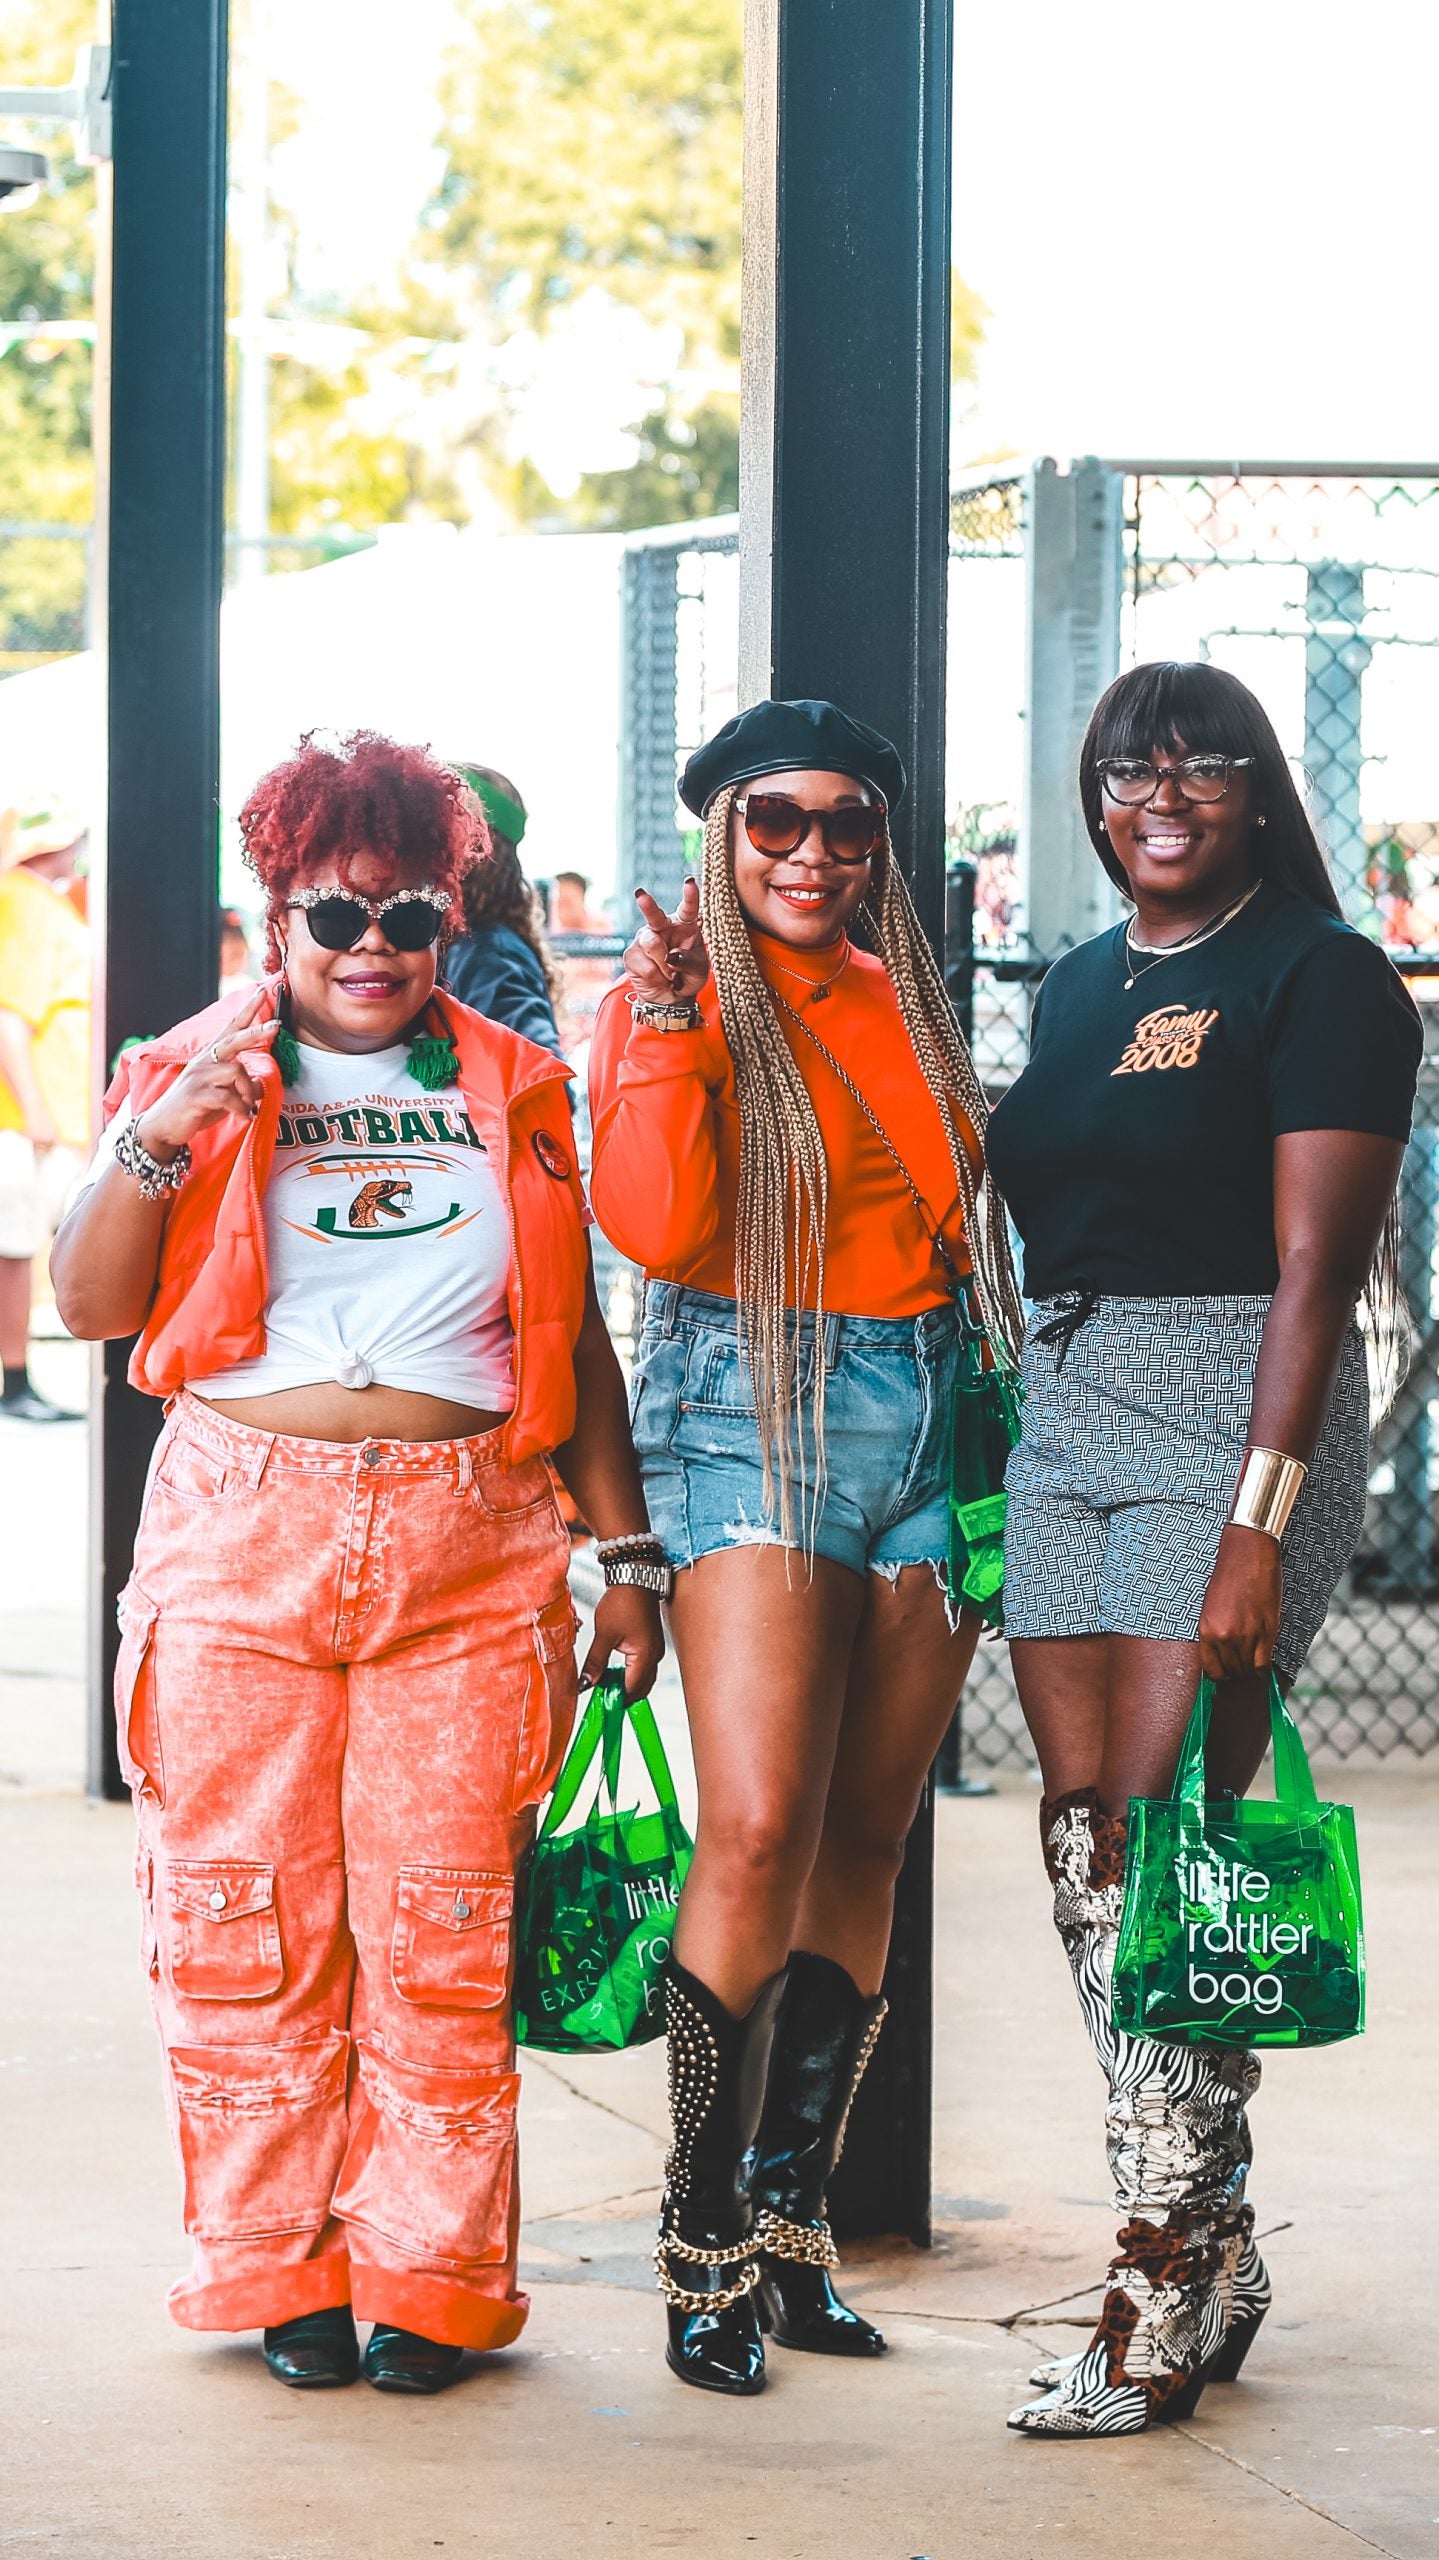 The Best Looks At FAMU’s Homecoming Football Game